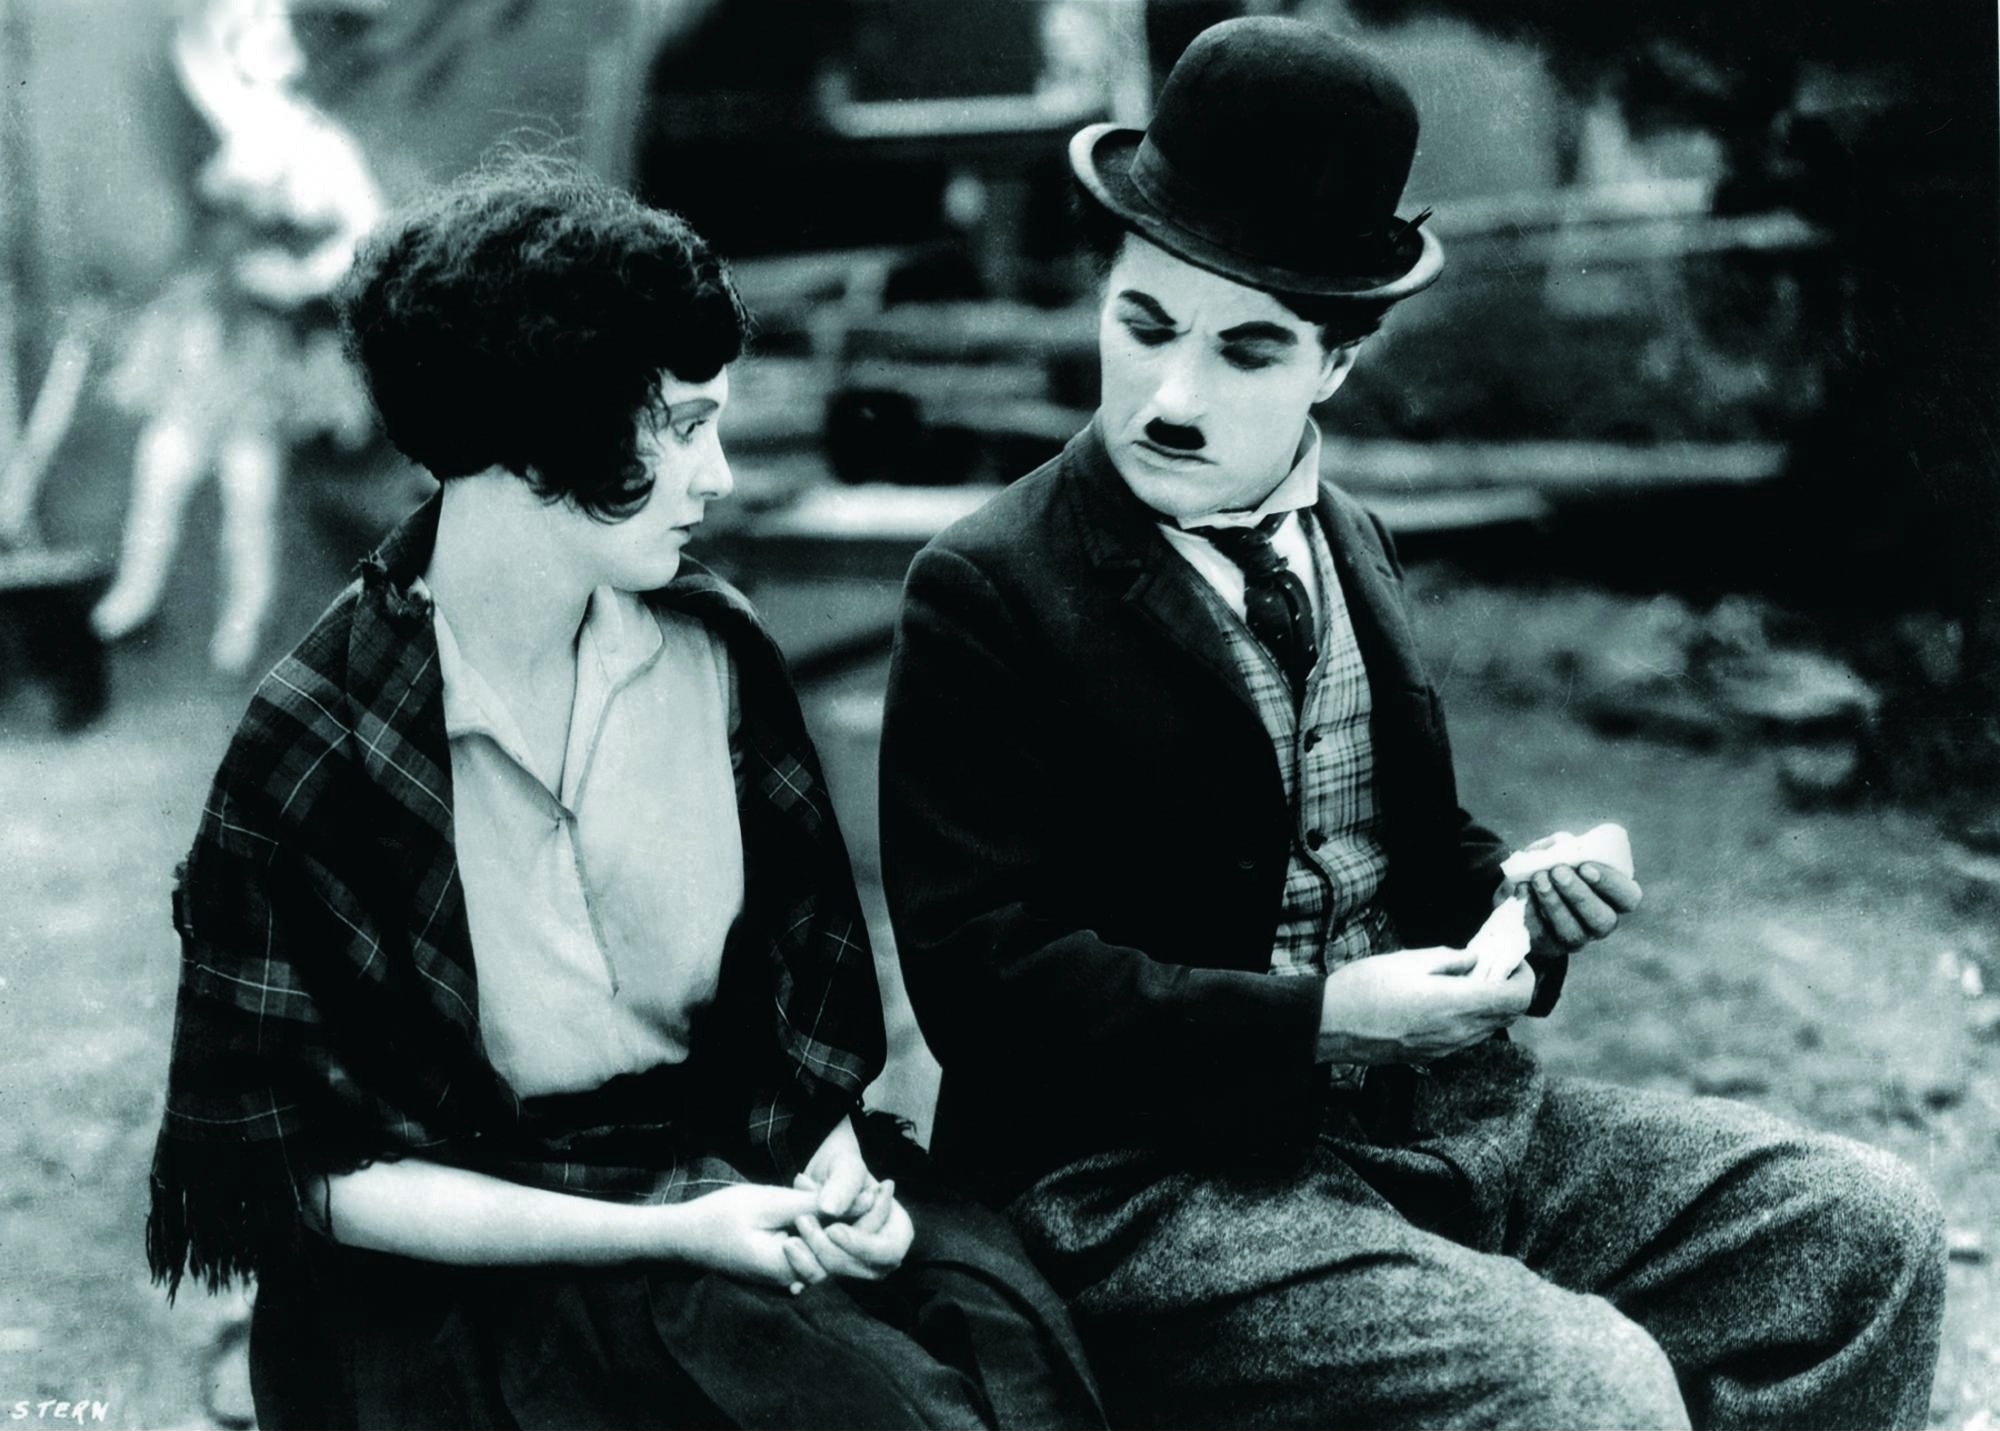 Still of Charles Chaplin and Merna Kennedy in The Circus (1928)